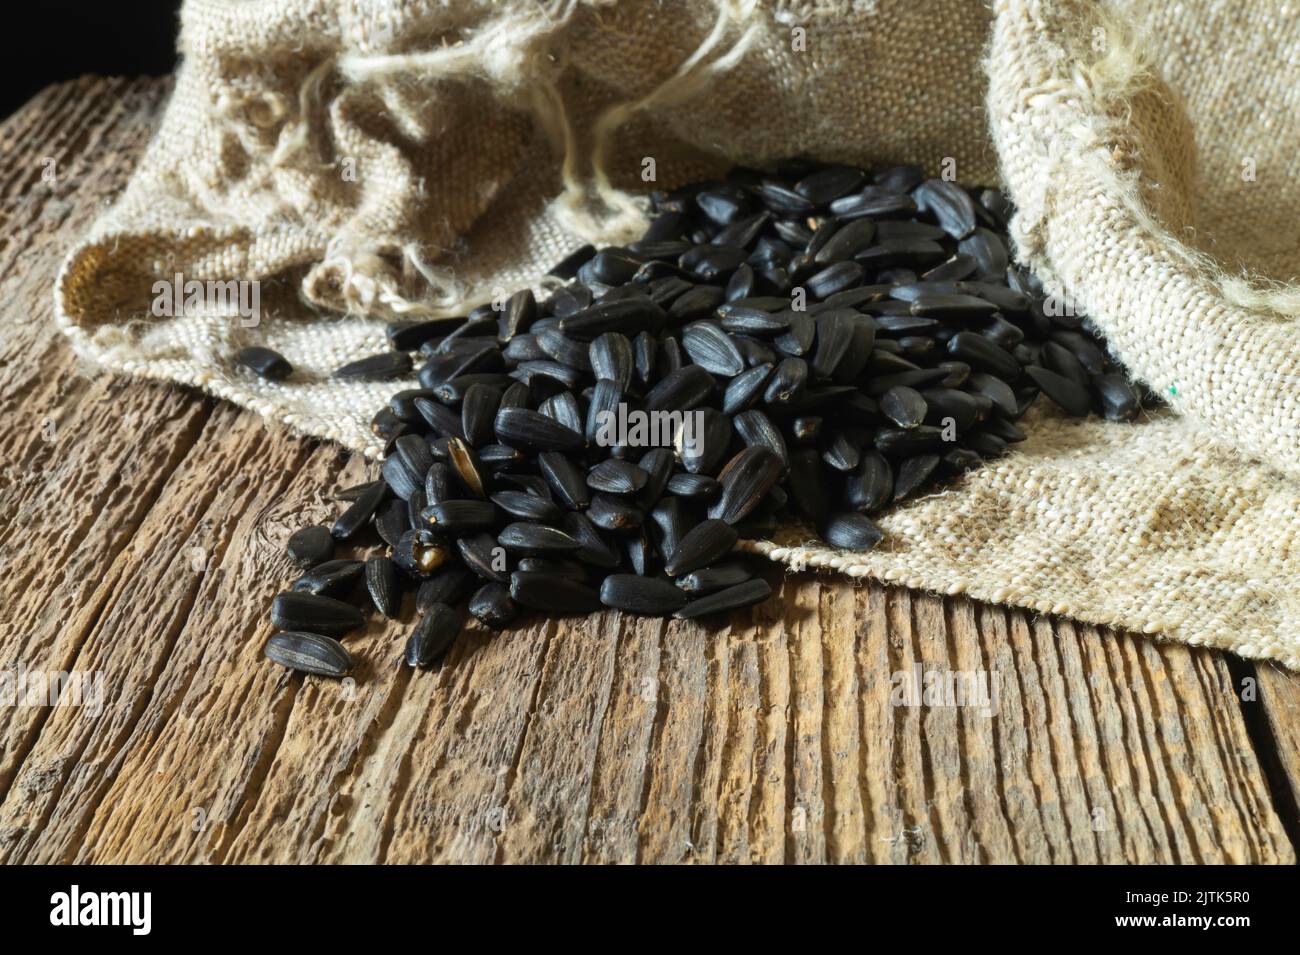 Still life with food on the background of burlap. A pile of seeds on an old board. Natural objects close-up Stock Photo